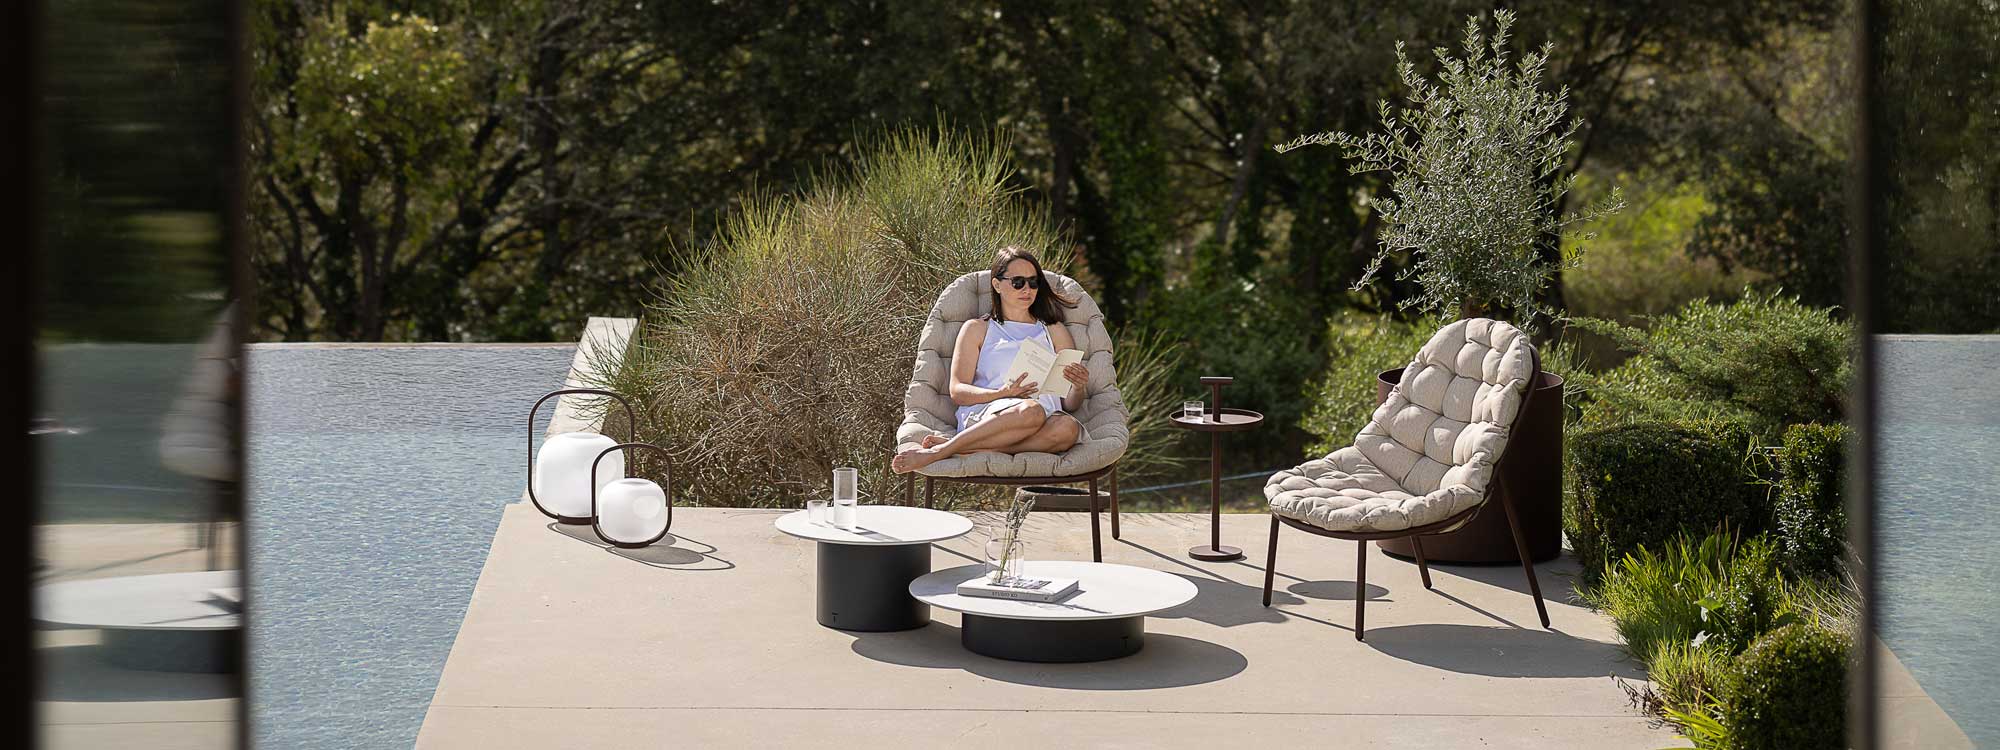 Albus garden lounge chair is a funky outdoor chair with deep cushion in stainless steel furniture materials by Todus luxury outdoor furniture